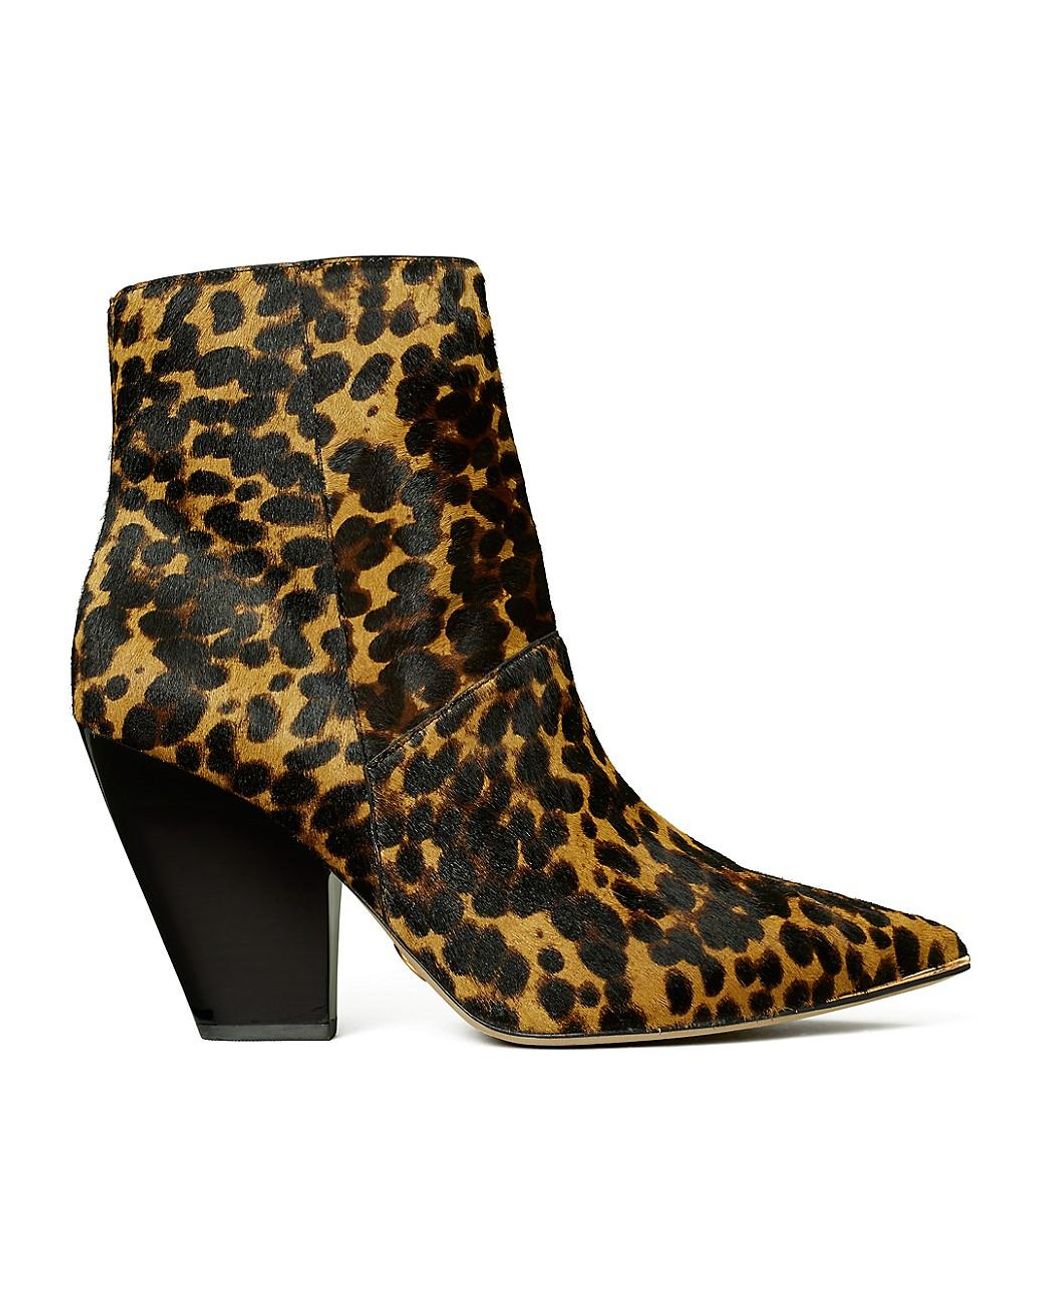 Tory Burch Leather Lila Leopard-print Calf Hair Ankle Boots in Brown - Lyst